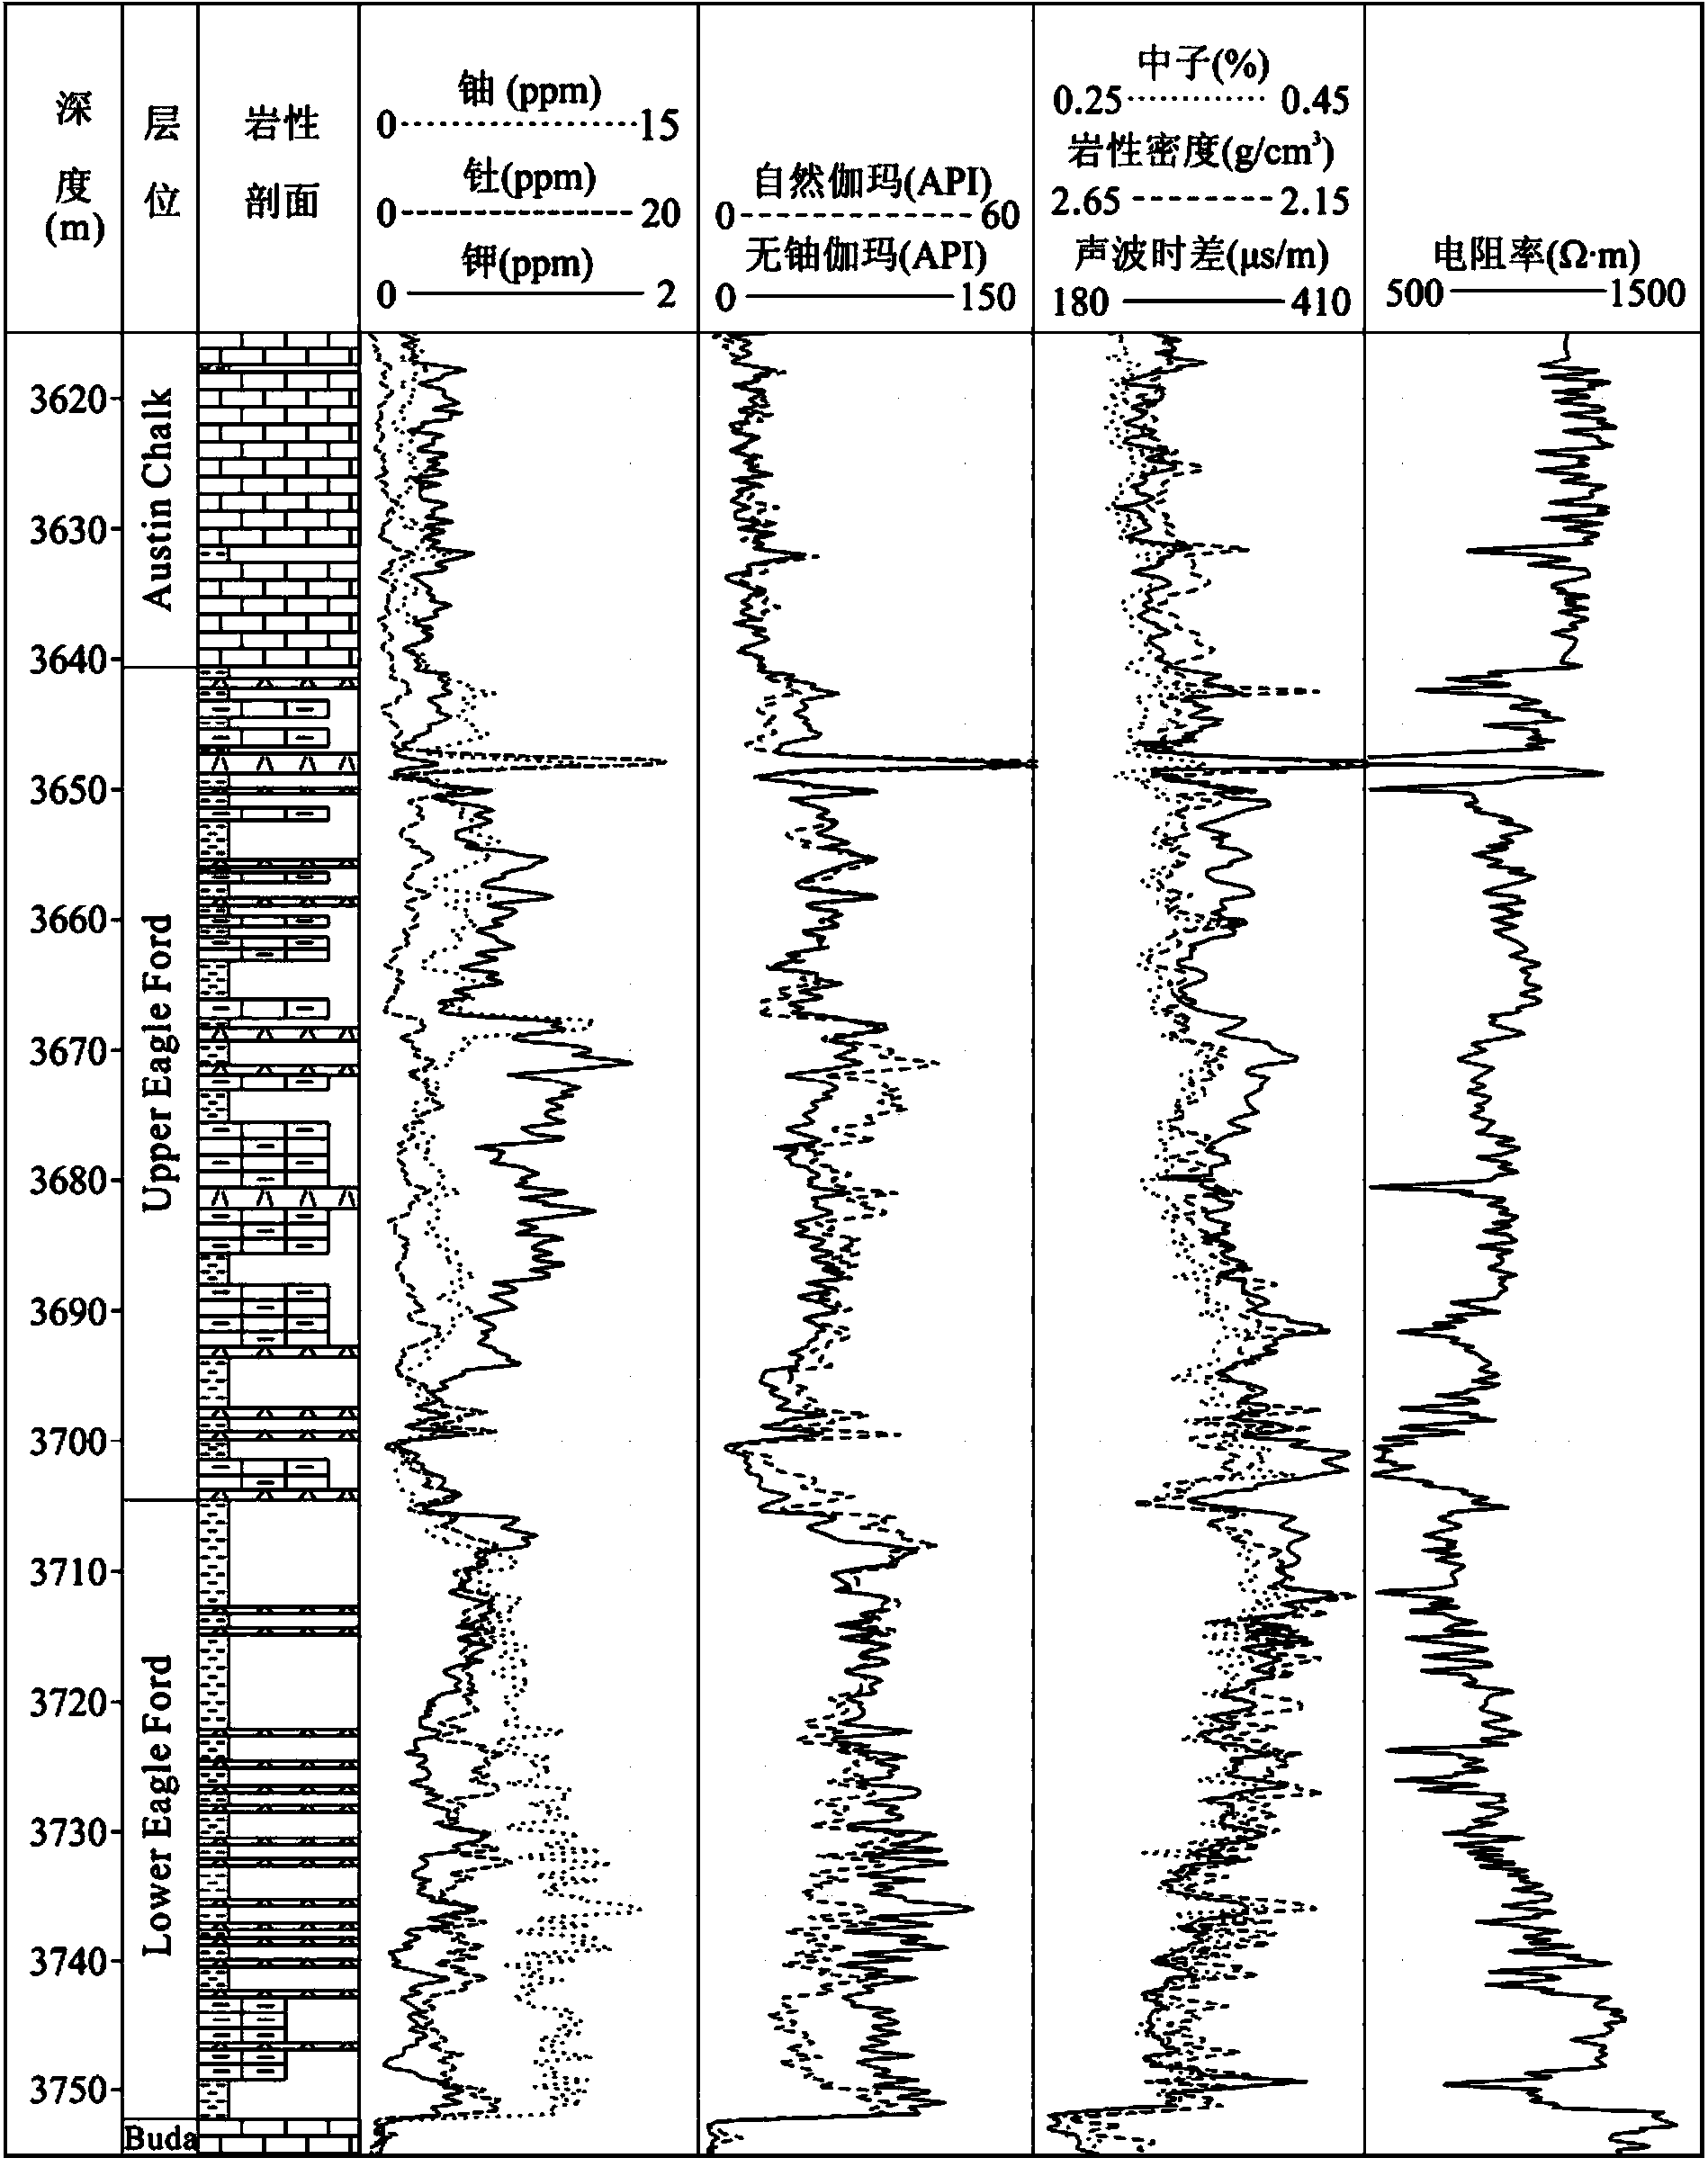 Method for evaluating organic carbon content of shale